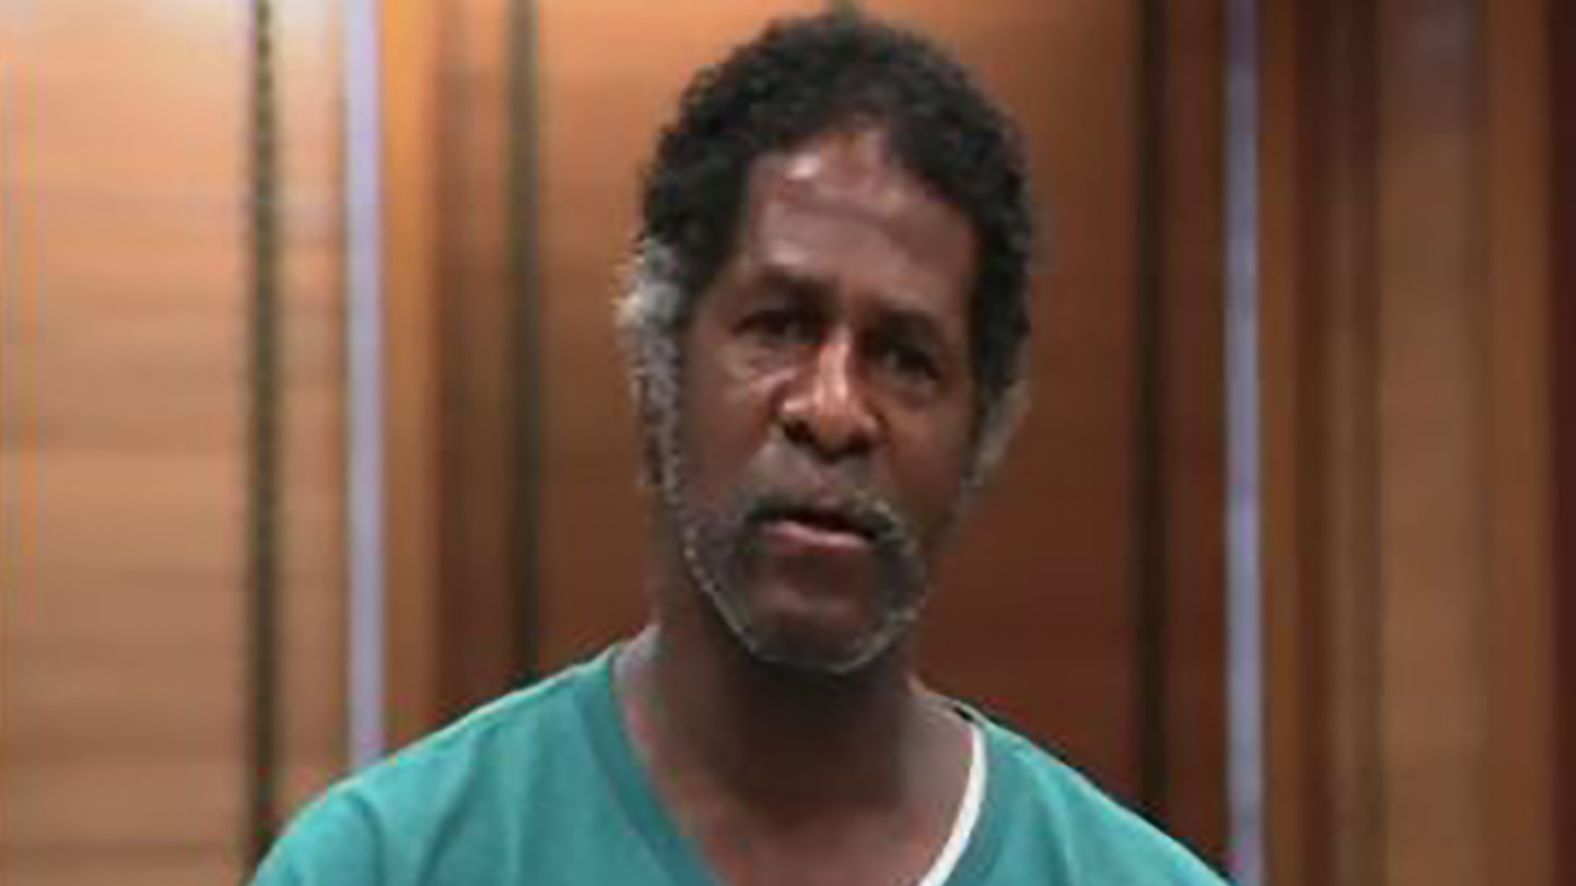 02 TN man recieves $75 after being wrongfully convicted